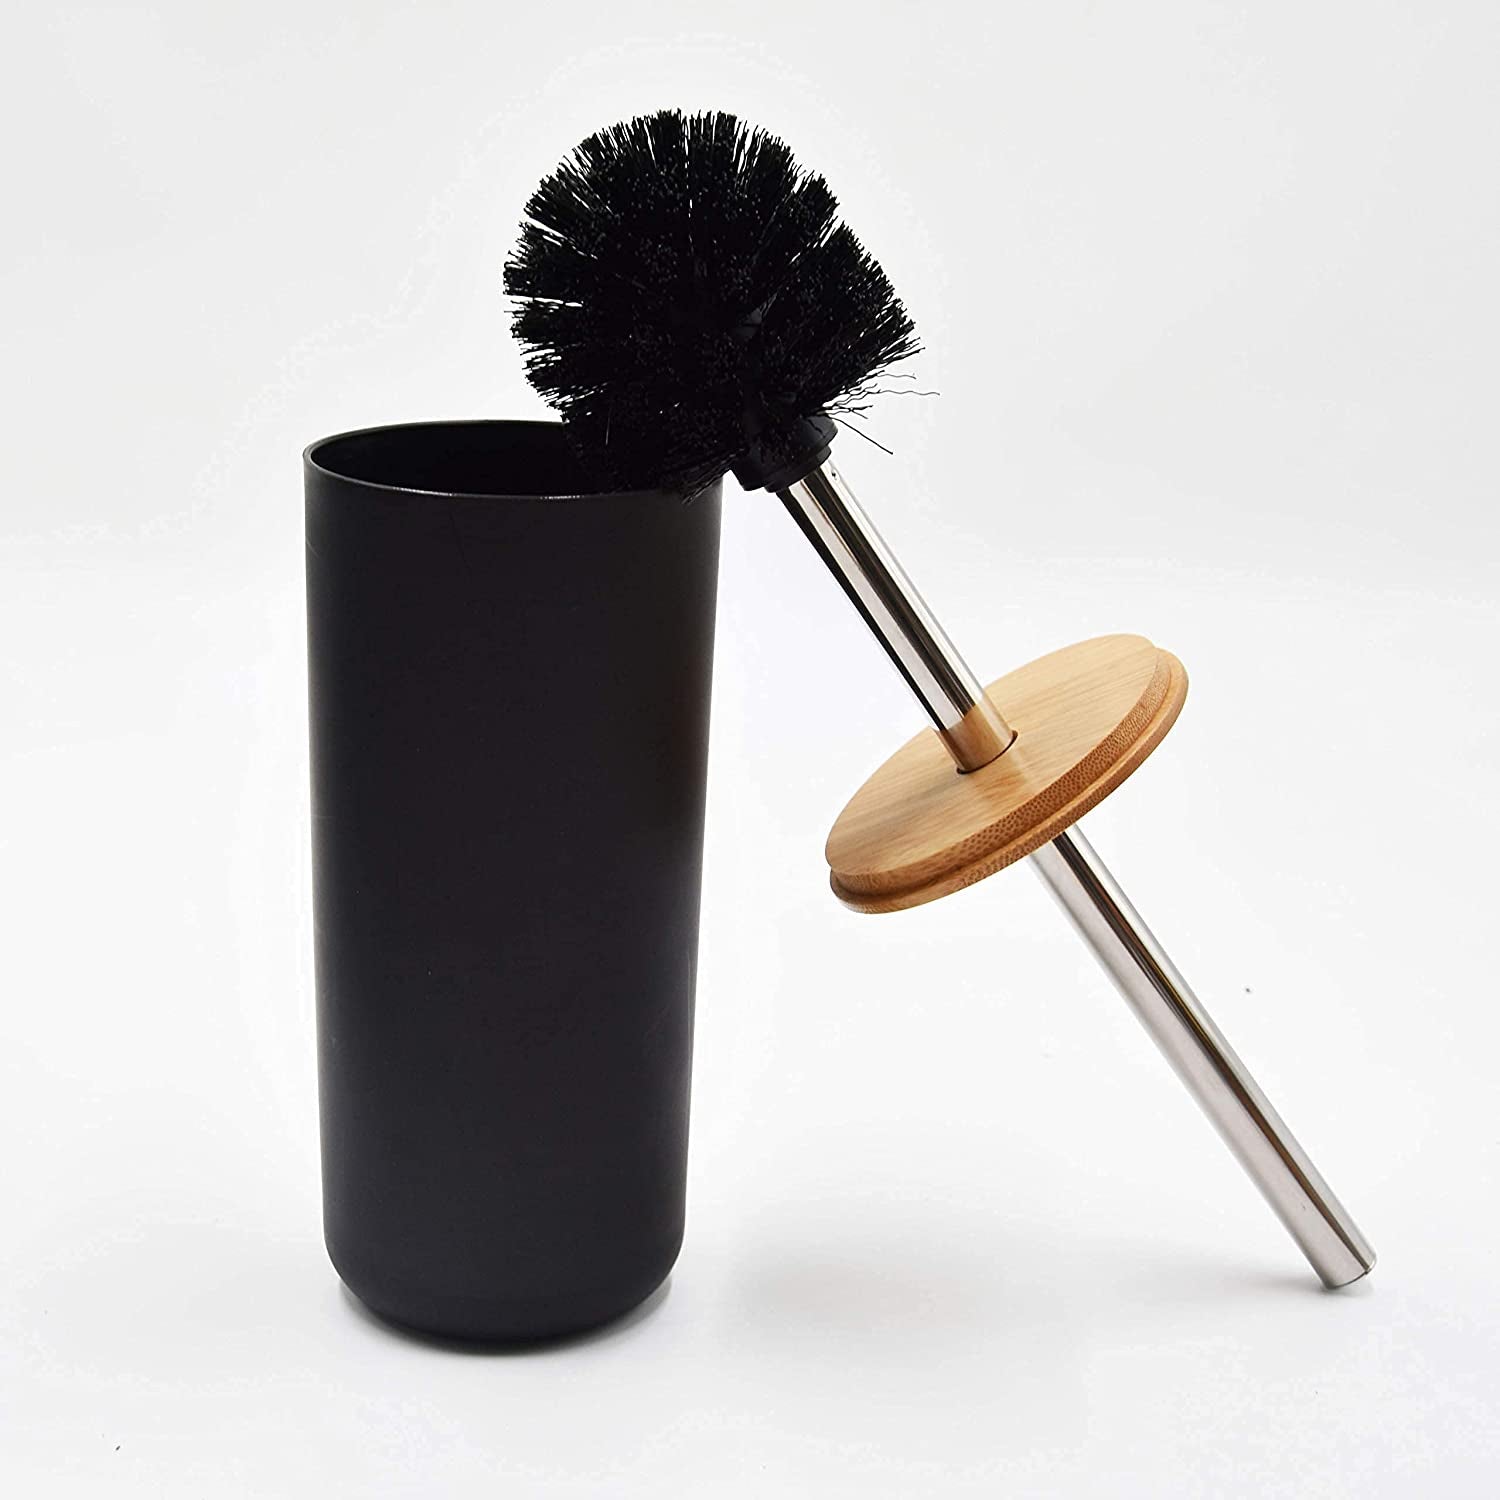 Belcka - 6 Pieces Bamboo Bathroom Accessories- Bathroom Bin and Toilet Brush Set- Durable Toothbrush Holder Cup- Soap Dispenser with Pump- Soap Dish Holder- Modern Trash Can- Black